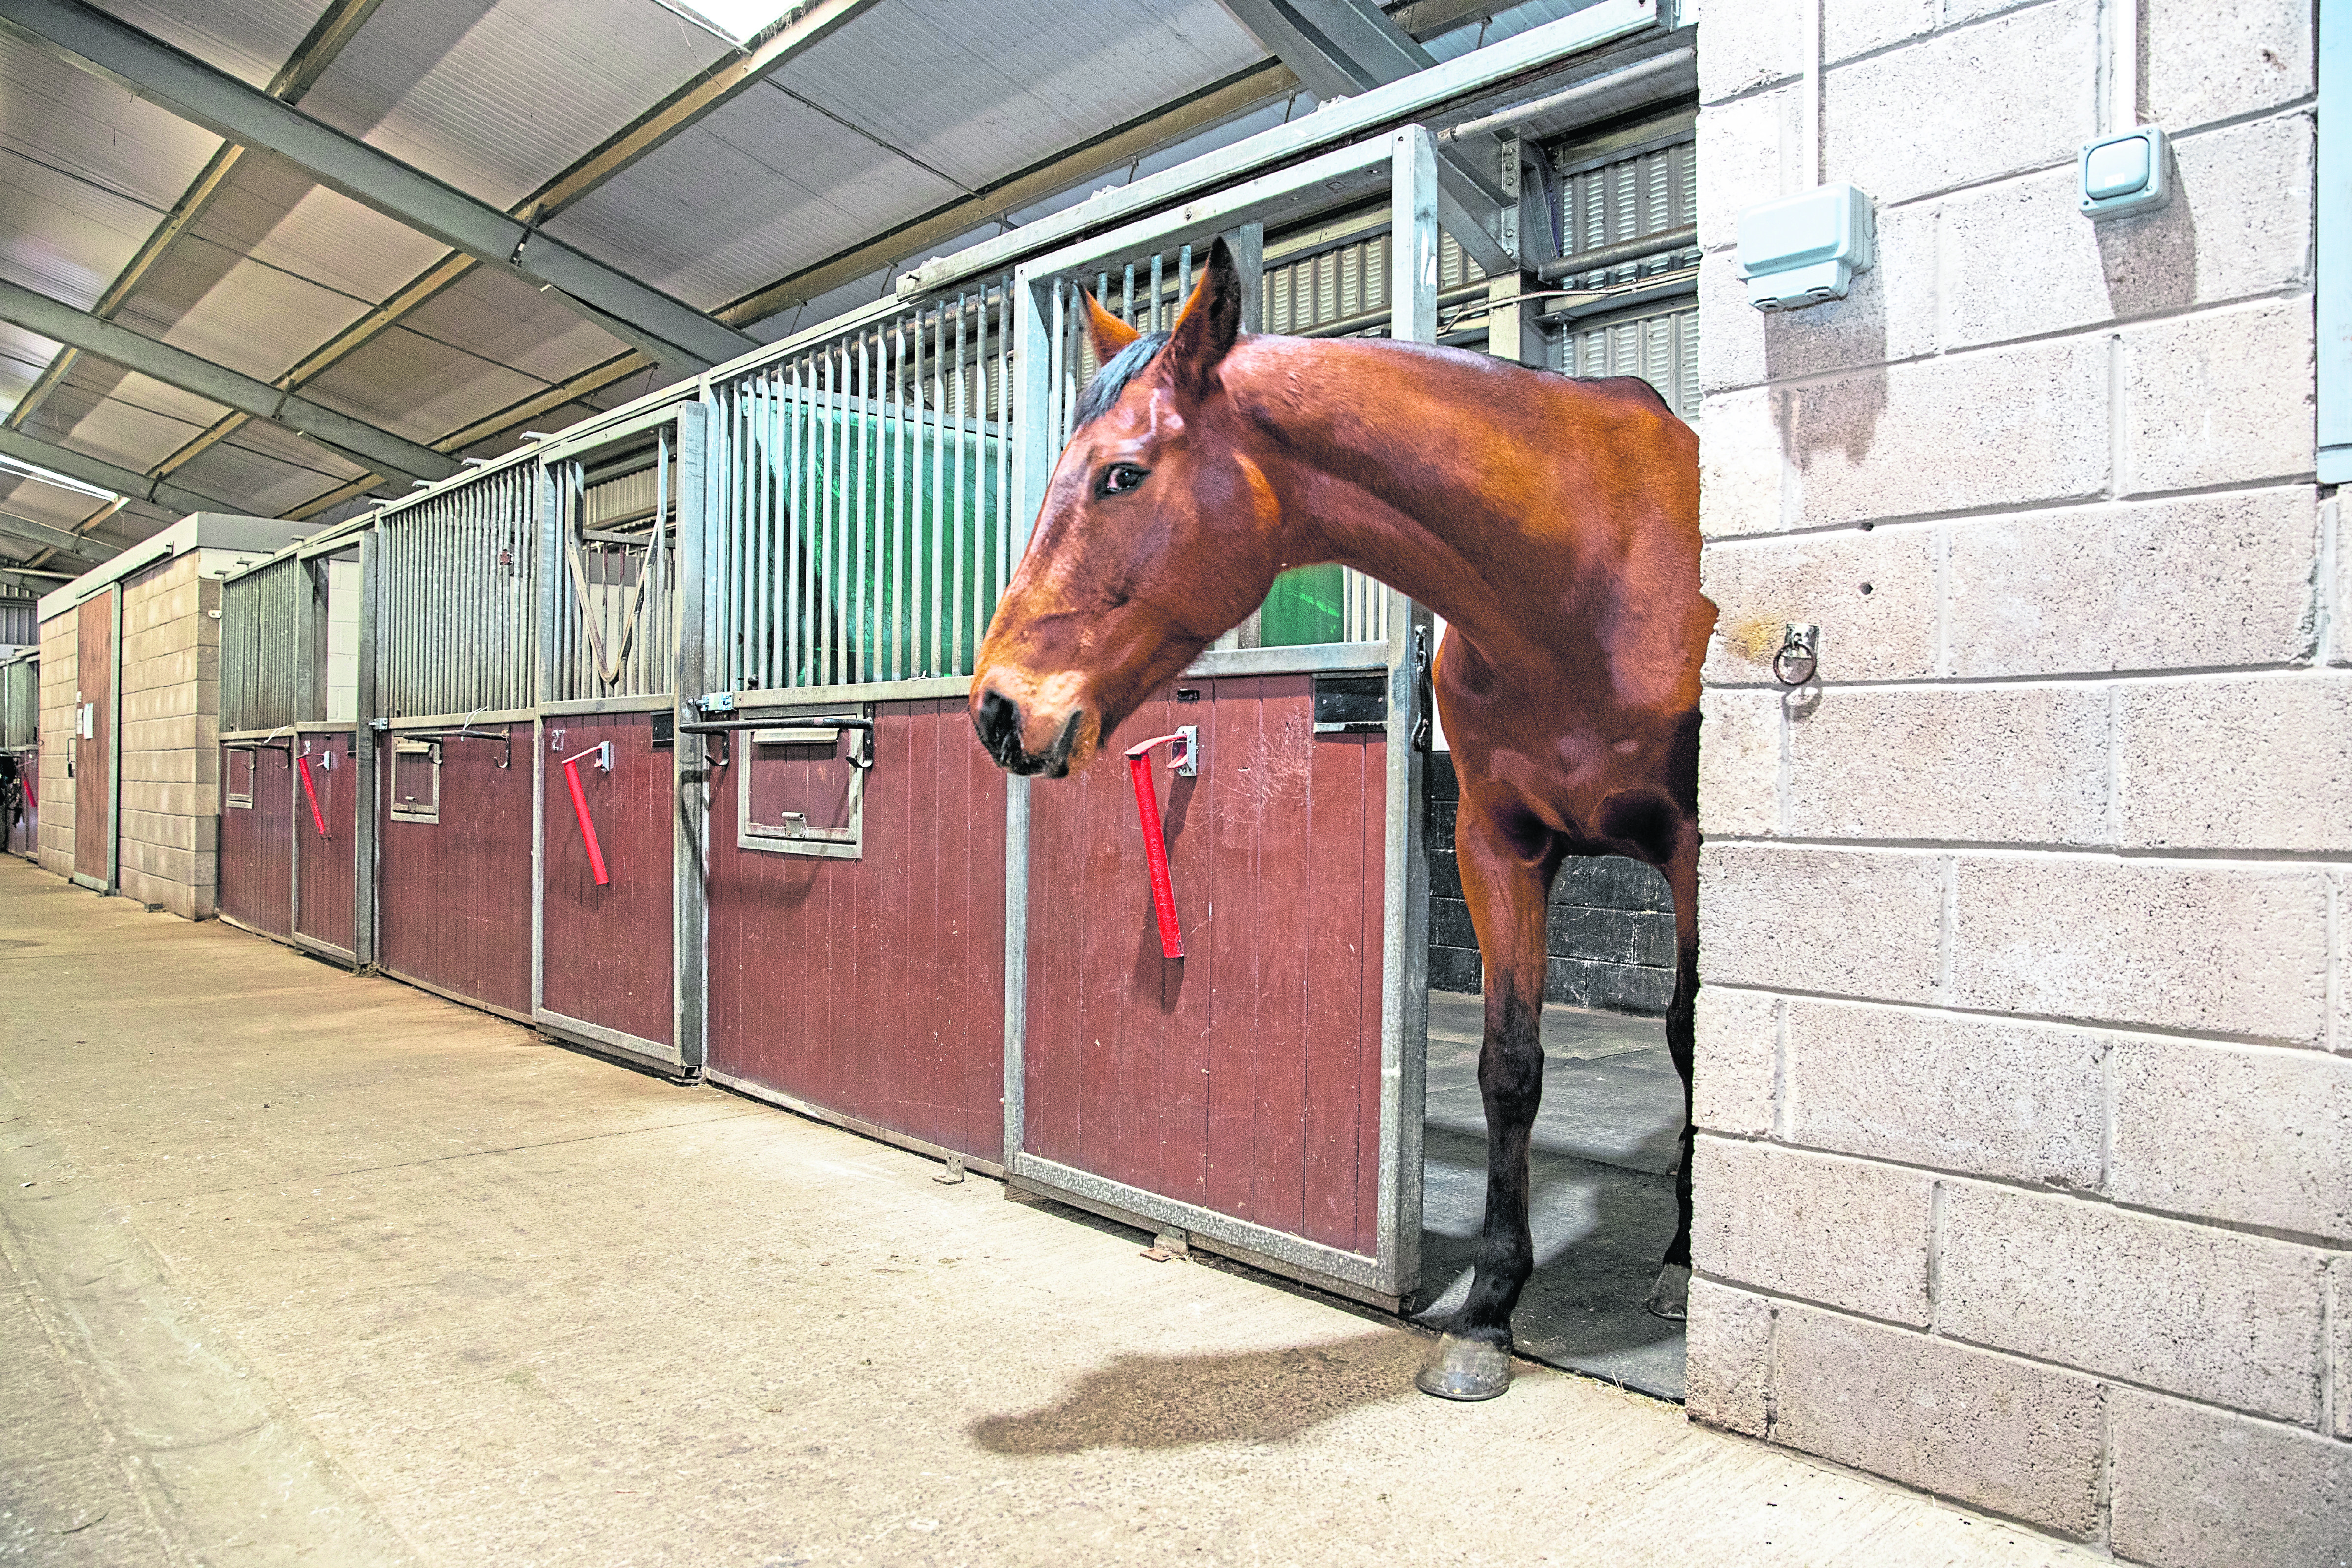 Billy the Horse, one of the smartest horses at the Scottish Equestrian centre, is very good at opening almost anything, including doors that are supposed to be horse proof.